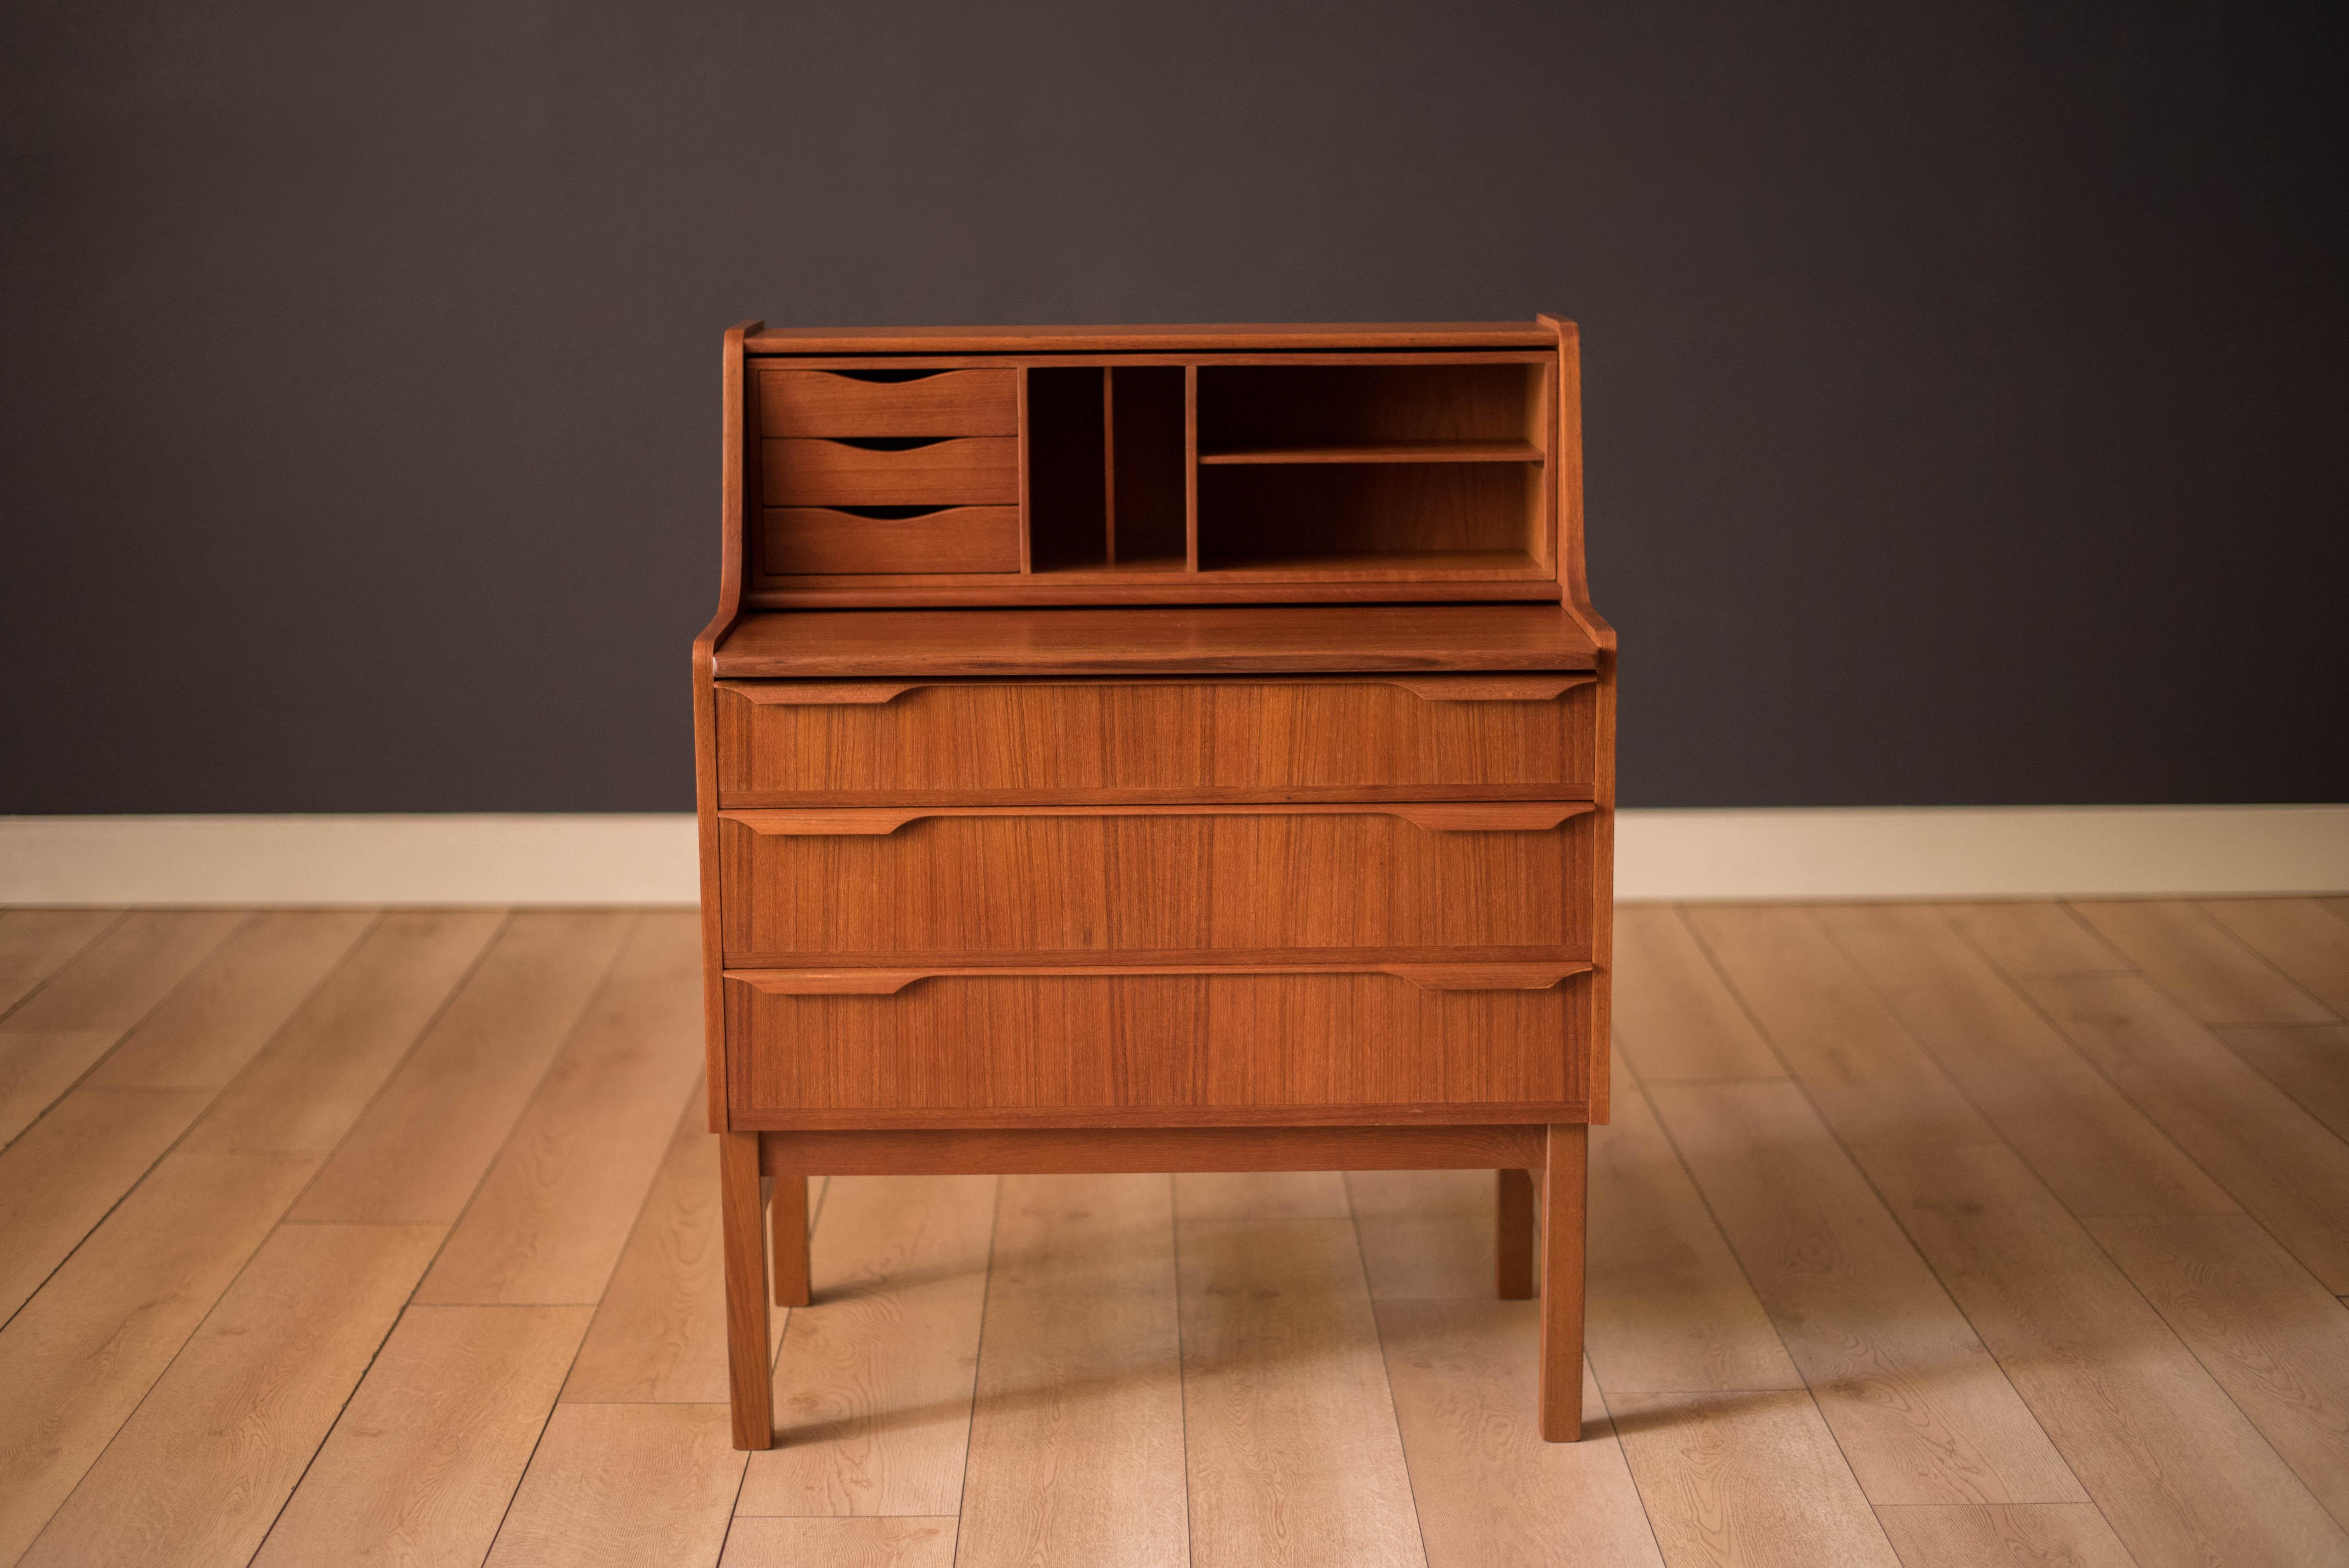 Vintage secretary desk with chest of drawers in teak manufactured by Trekanten, Denmark. Features a hidden mirror vanity slide out desk to maximize space and three dovetailed storage drawers with sculpted pulls. This versatile piece includes a